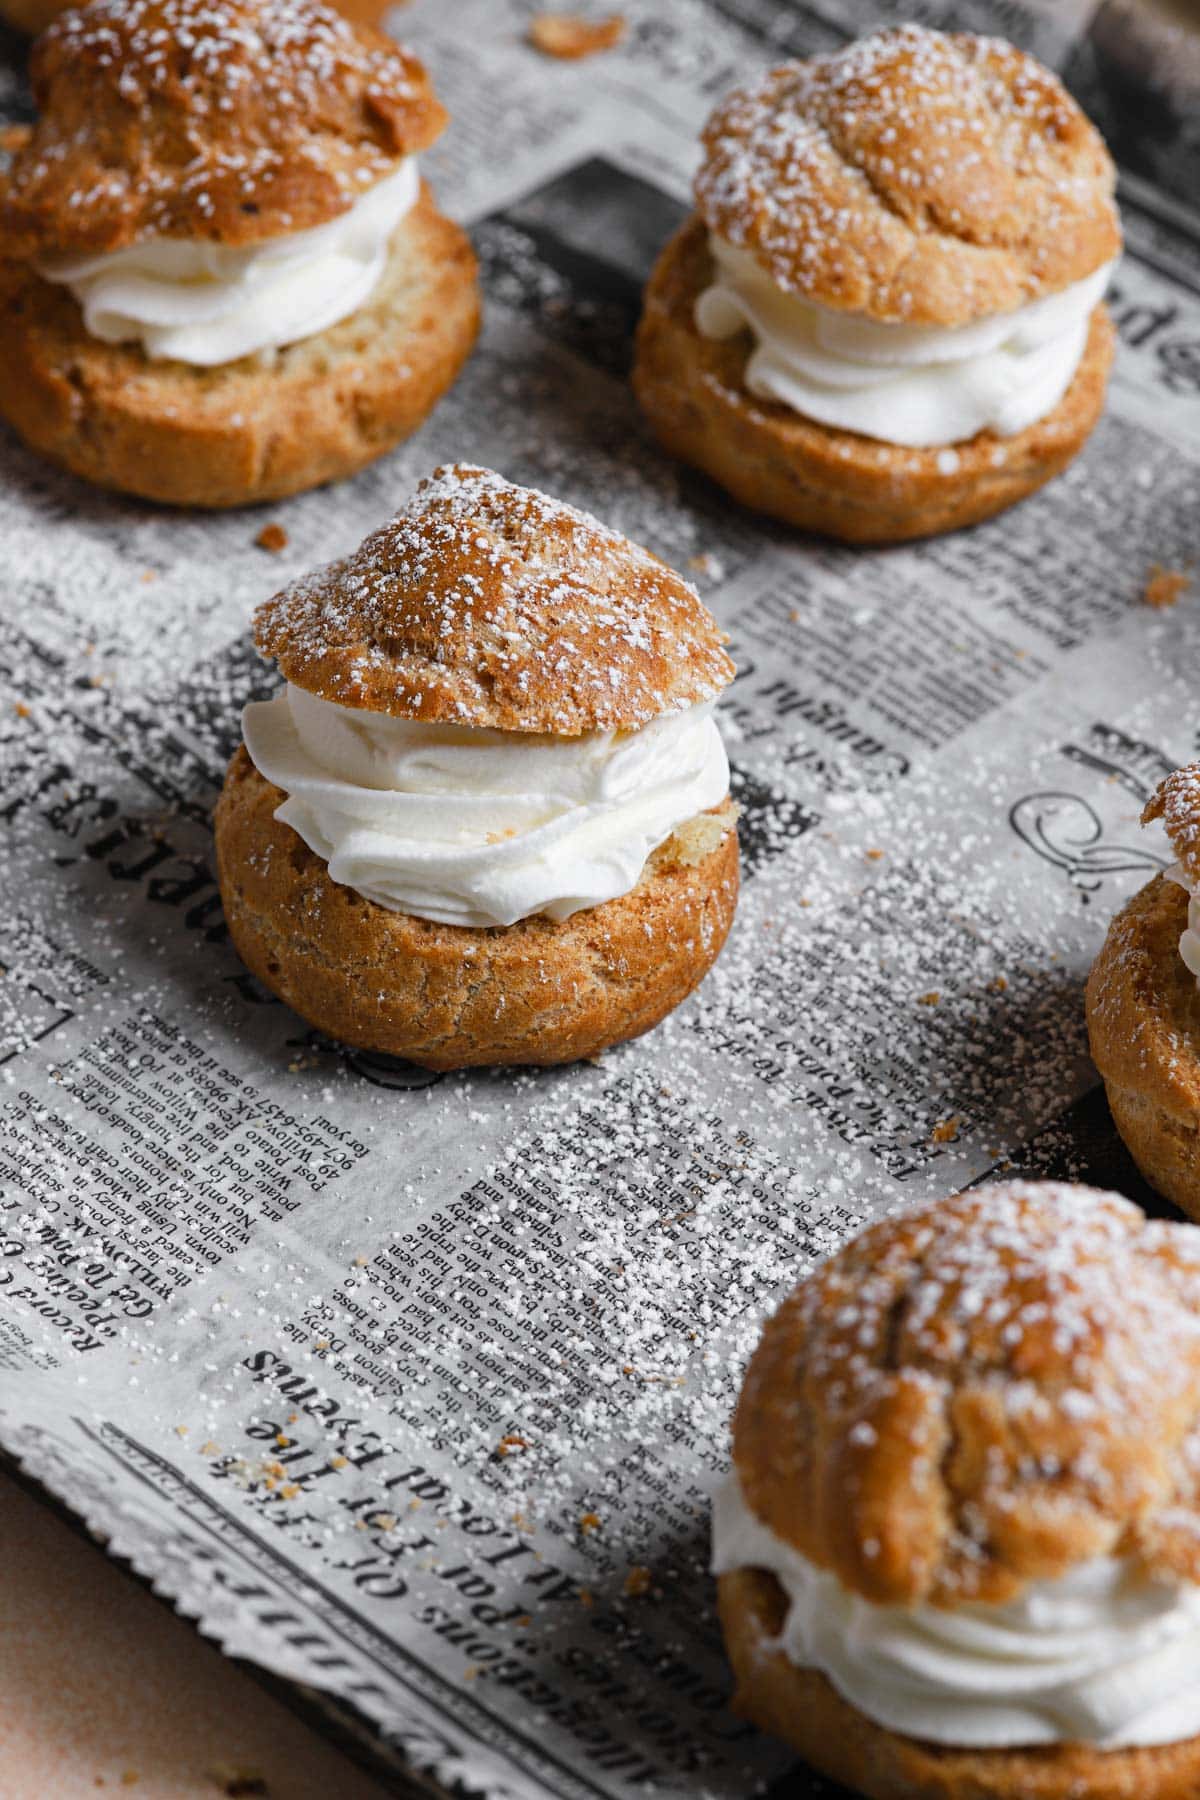 Cream puffs filled with cream and dusted with powdered sugar.